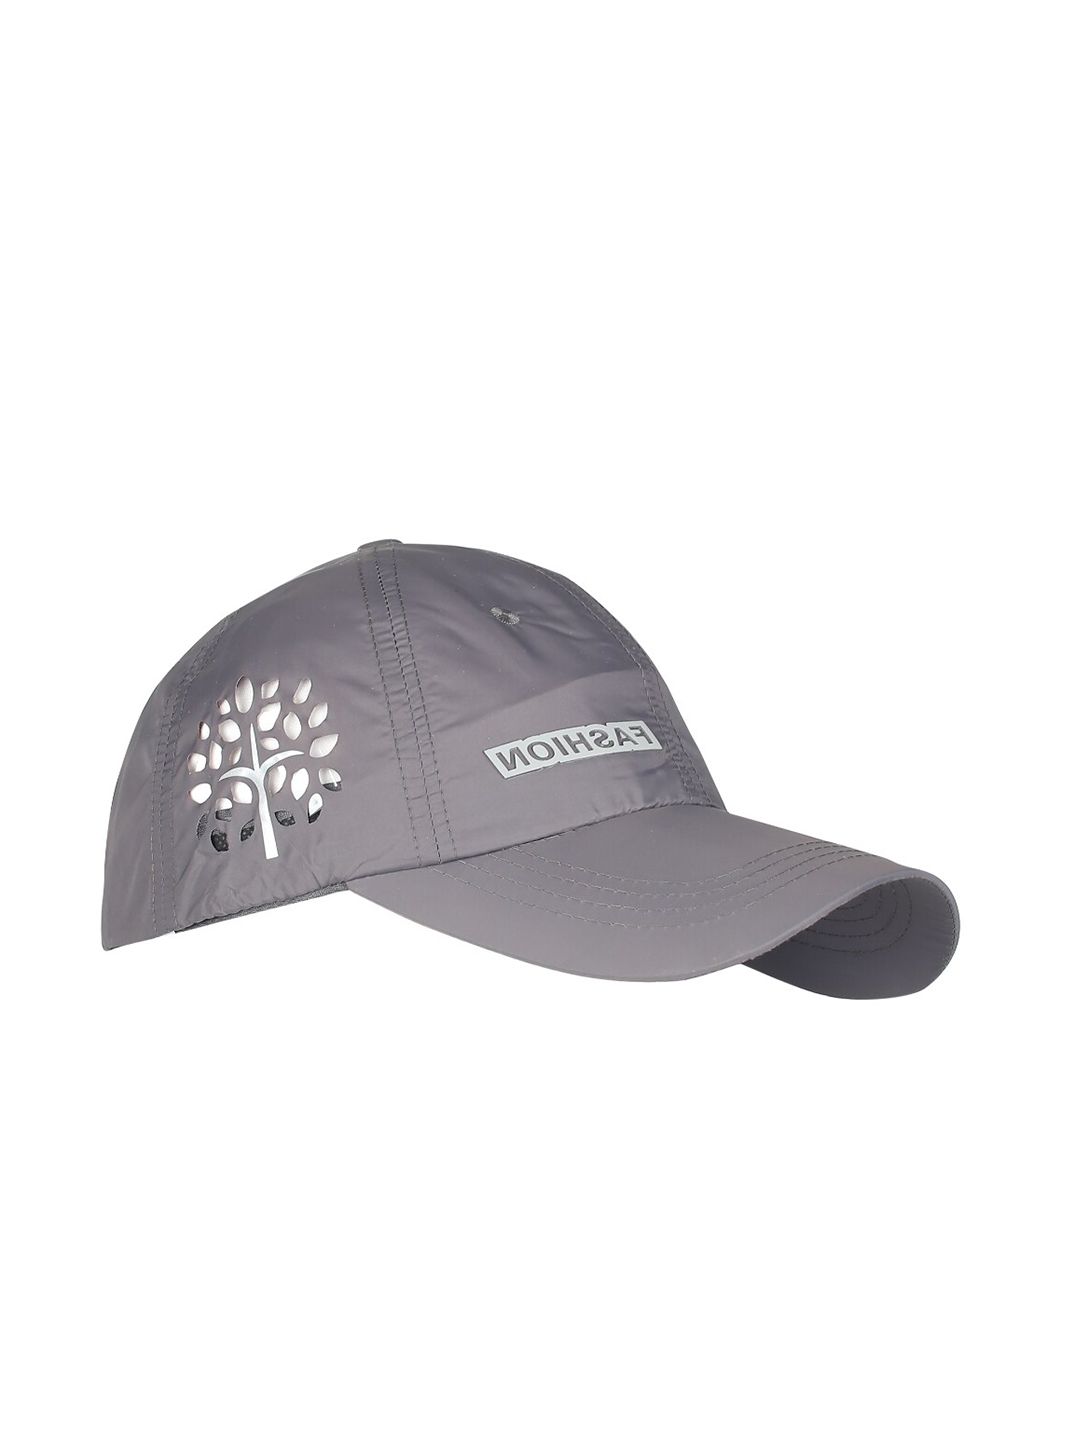 iSWEVEN Unisex Grey Printed Snapback Cap Price in India